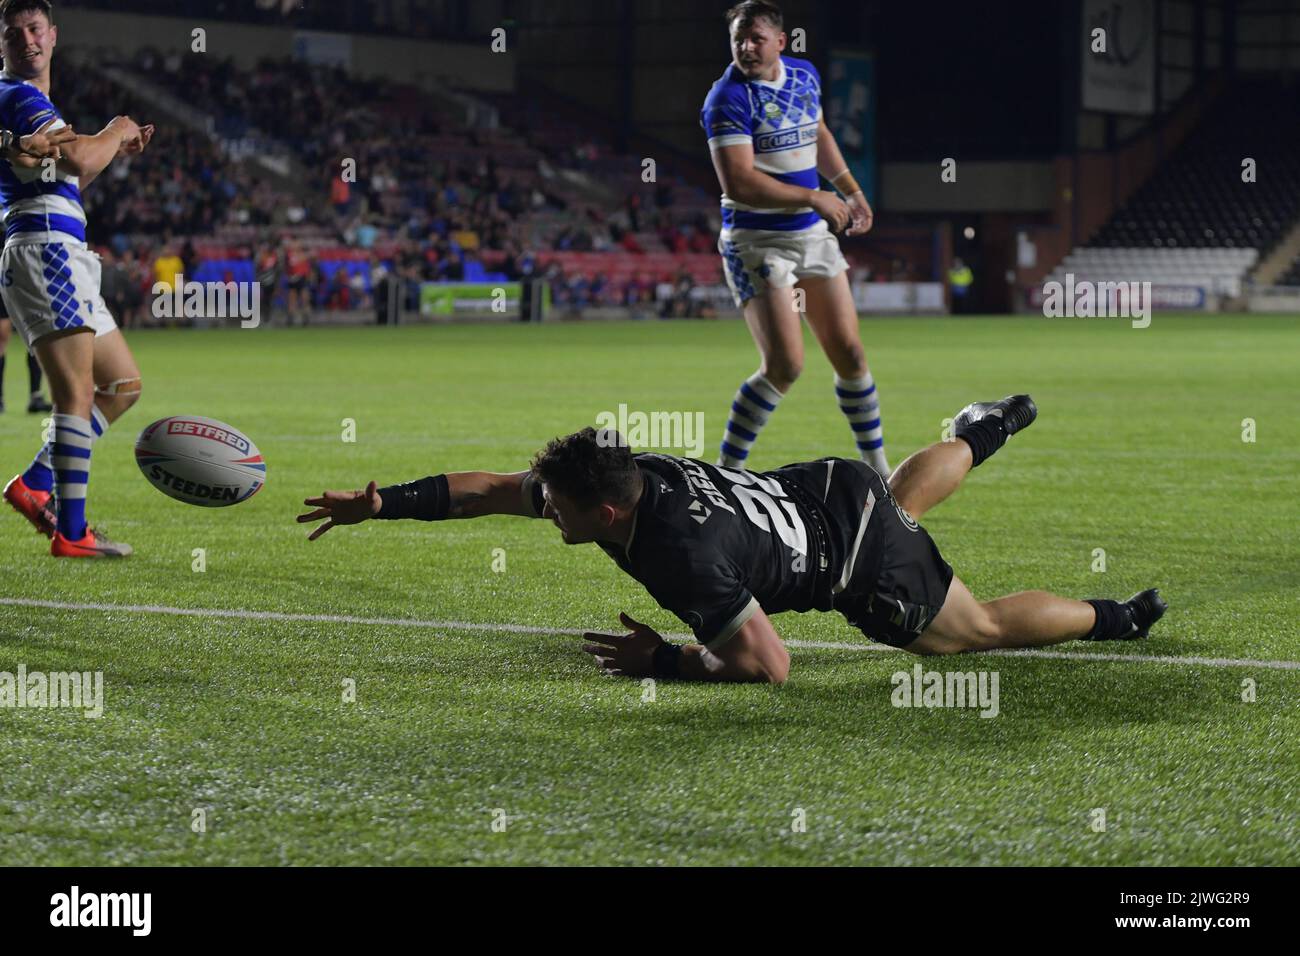 DCBL Stadium, Widnes, England. 5th September 2022. Betfred Championship, Widnes Vikings versus Halifax Panthers; Callum Field goes agonisingly close to scoring for Widnes, Betfred Championship match between Widnes Vikings and Halifax Panthers Credit: MARK PERCY/Alamy Live News Stock Photo